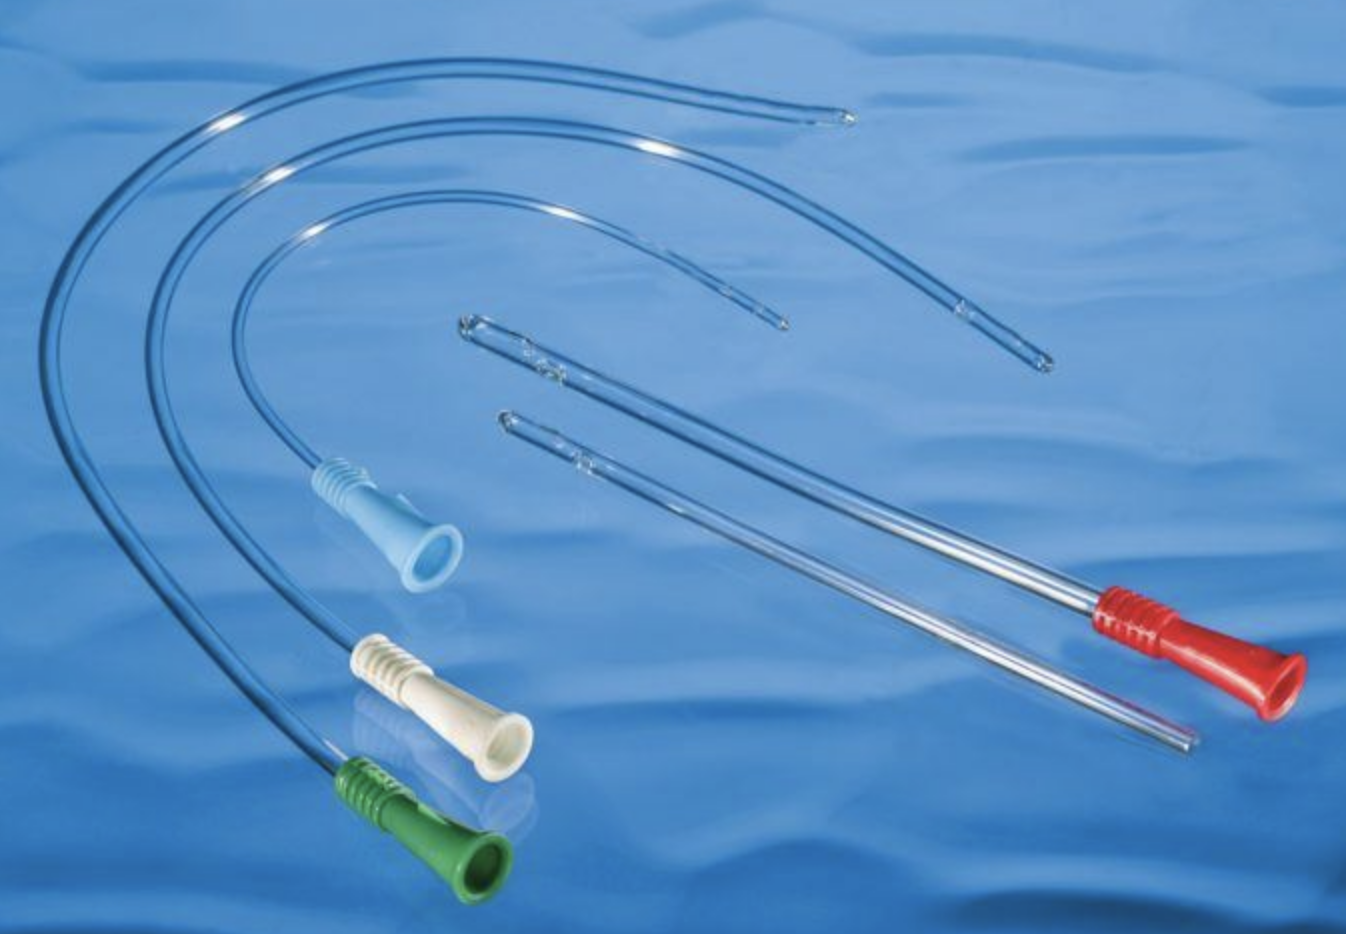 Details more than 77 types of urinary catheter bags - esthdonghoadian